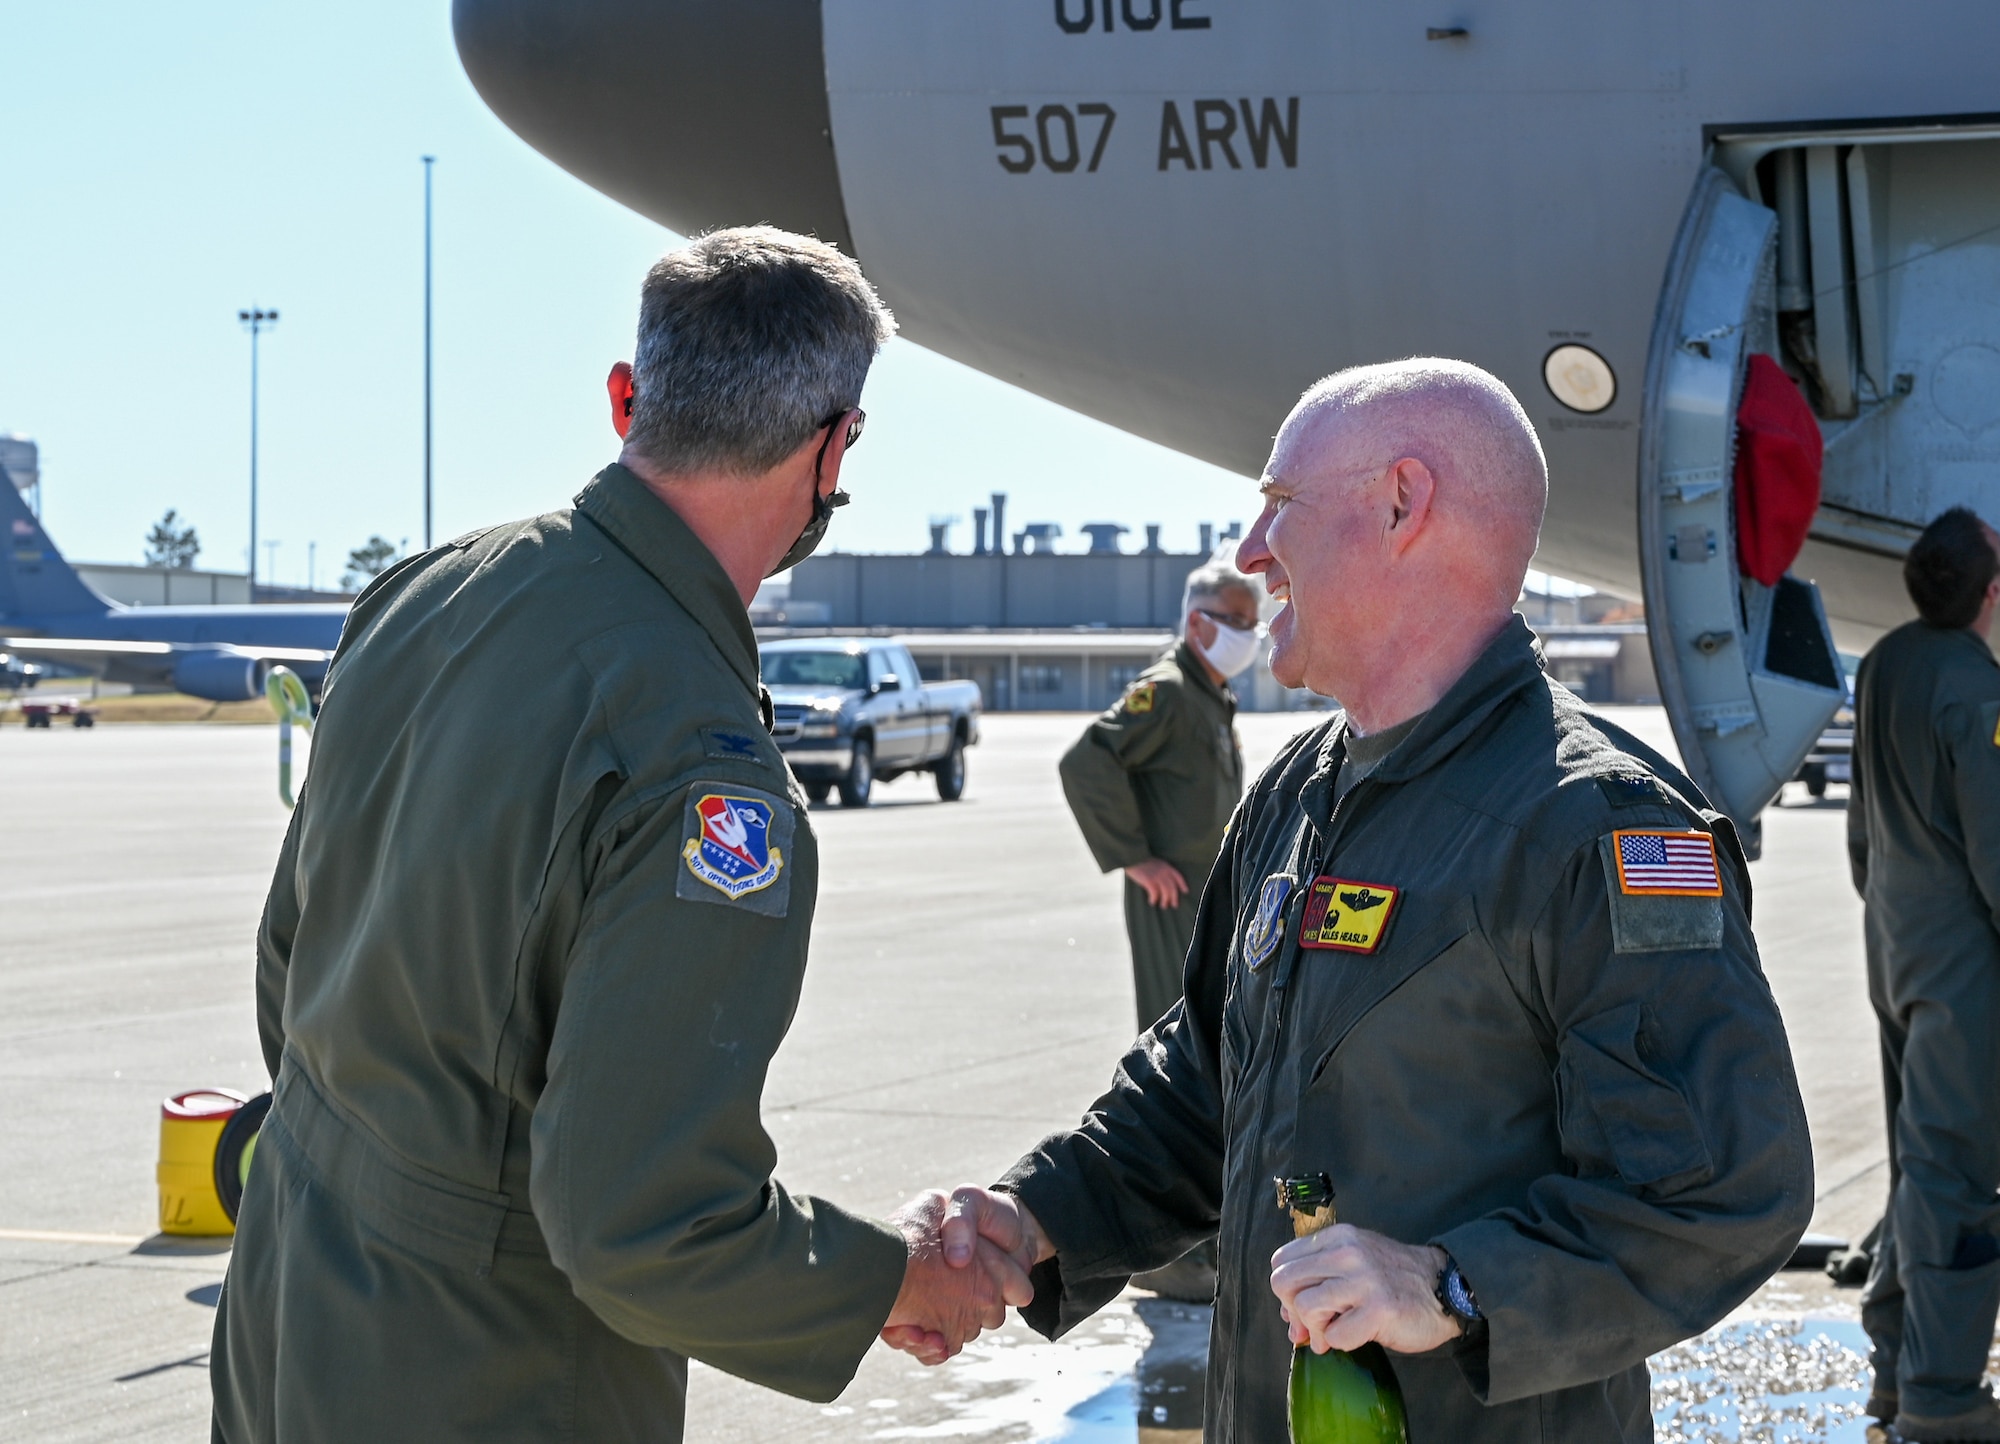 Col. Miles Heaslip, 507th Air Refueling Wing commander, shakes hands with Col. Kenneth Humphrey, 507th Operations Group commander, after his final flight with the Okies on Nov. 5, 2020, at Tinker Air Force Base, Oklahoma. (U.S. Air Force photo by Senior Airman Mary Begy)